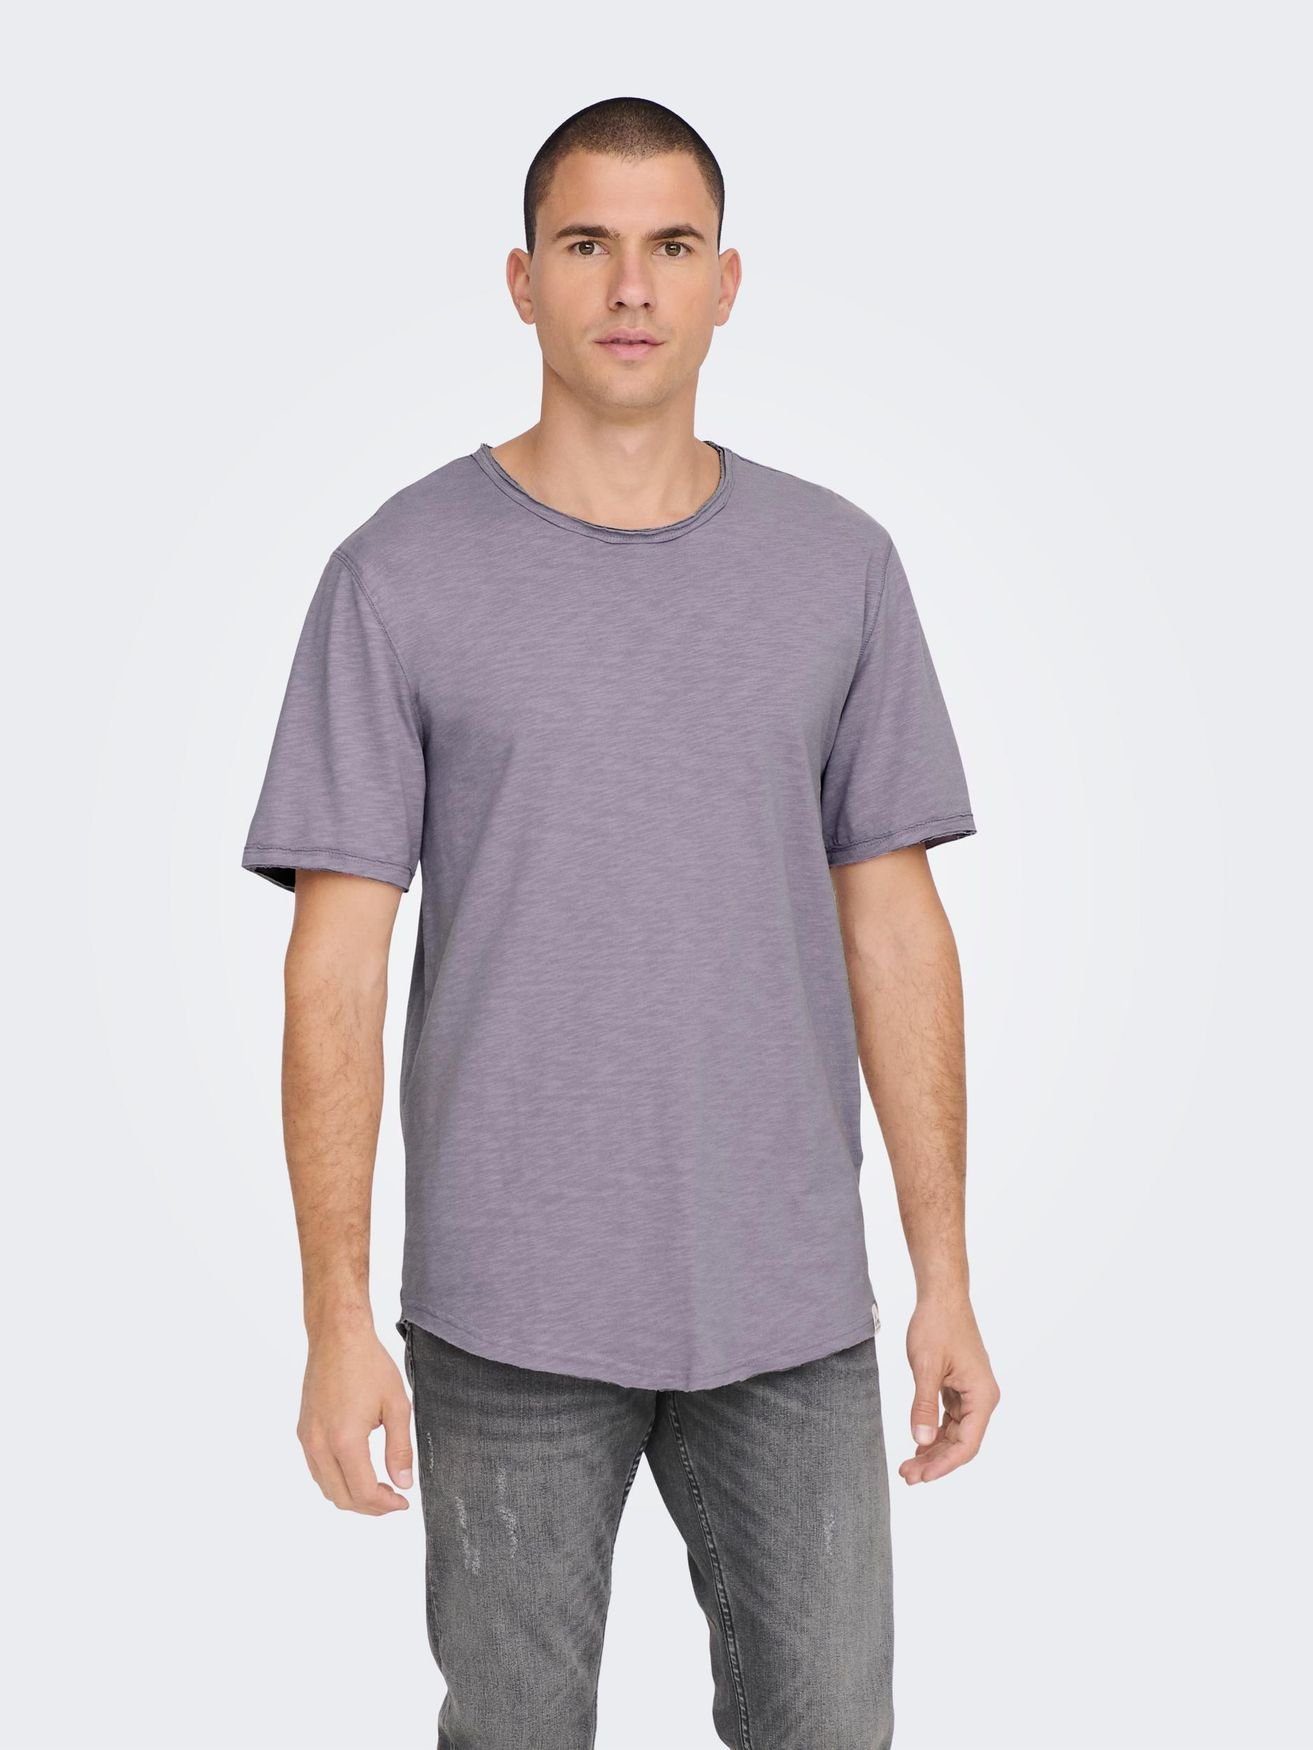 ONLY & SONS T-Shirt Langes Rundhals T-Shirt Einfarbiges Kurzarm Basic Shirt ONSBENNE 4783 in Lila